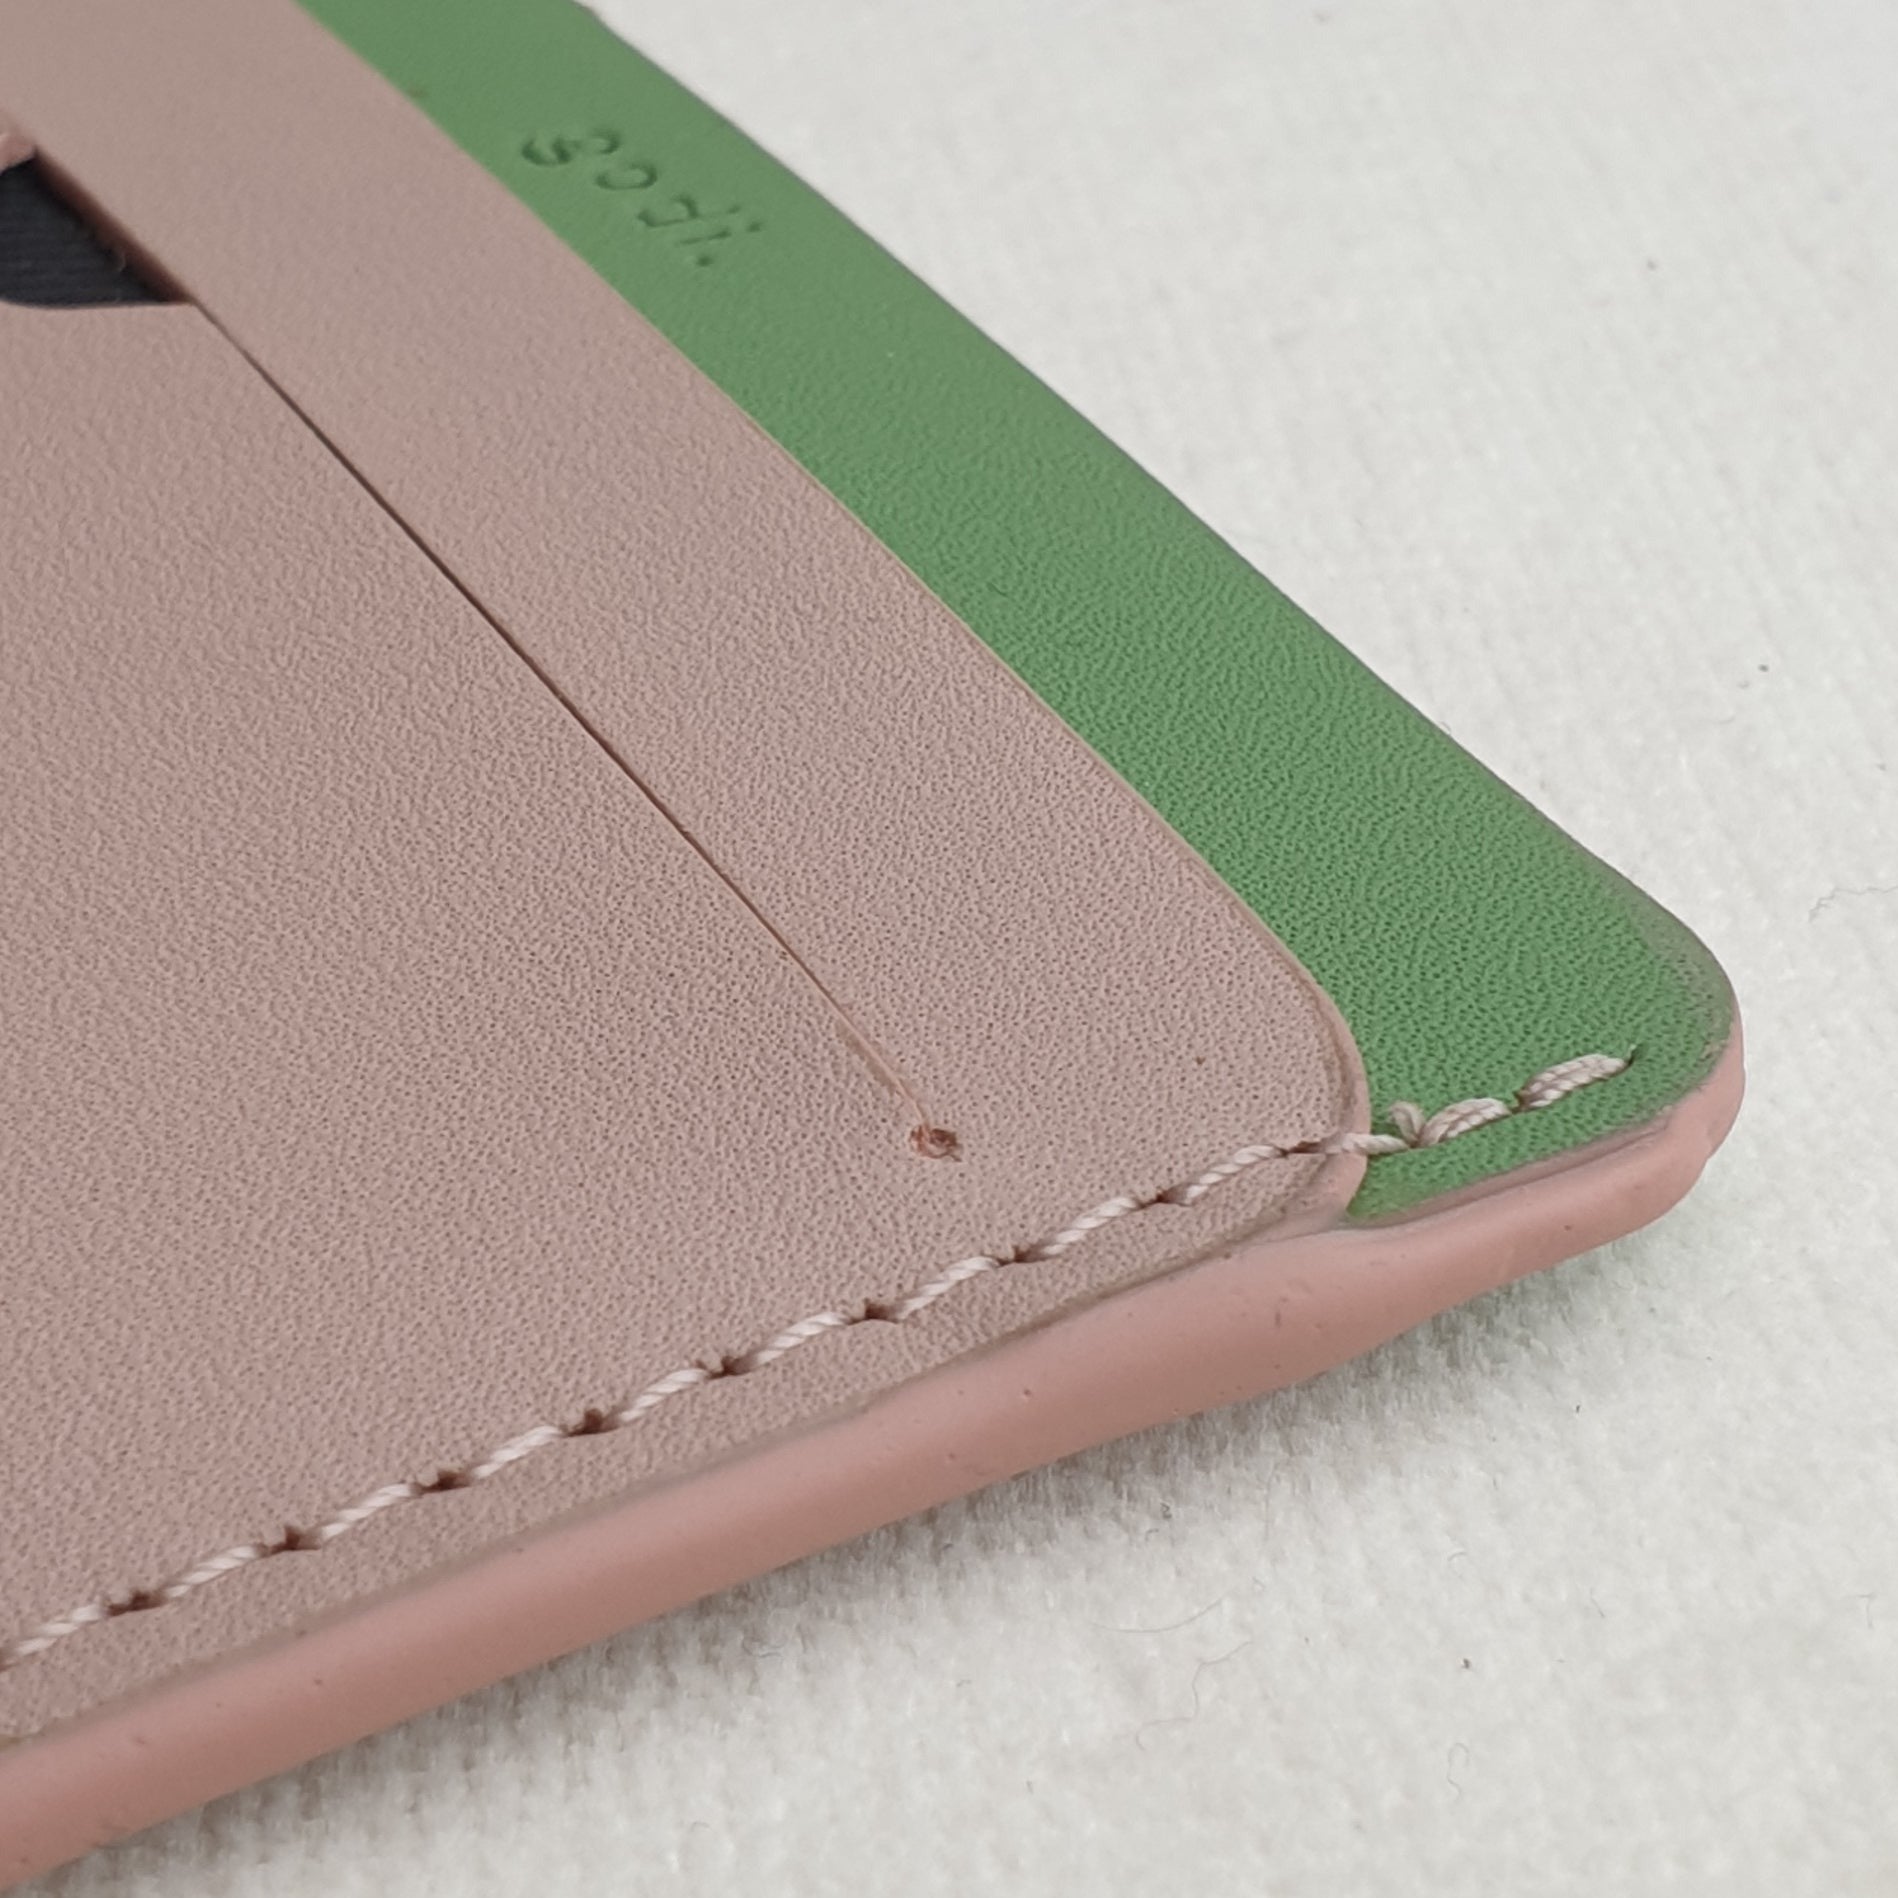 Slim Cardholder in Nude Pink and Sea Green